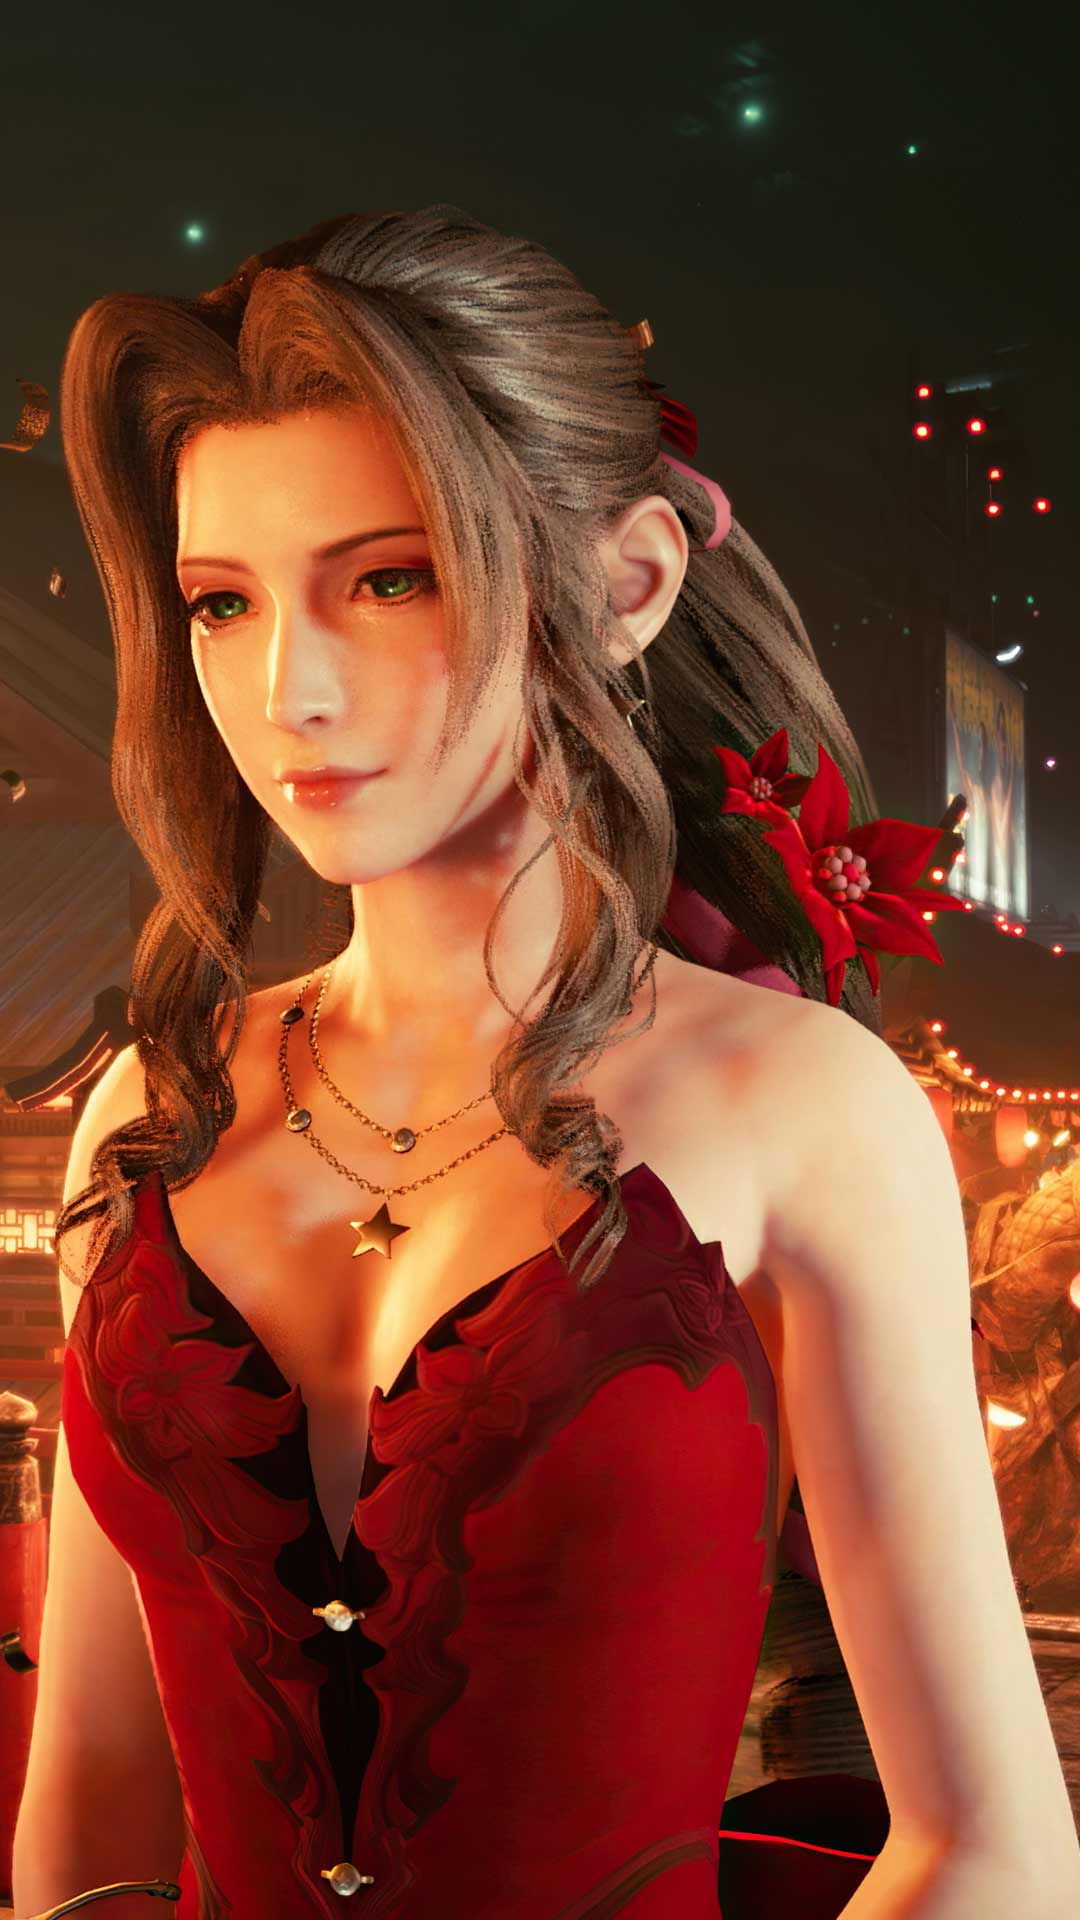 Final Fantasy 7 Remake wallpaper HD phone background PS4 game art poster logo on iPhone android. Final fantasy vii, Final fantasy girls, Final fantasy aerith